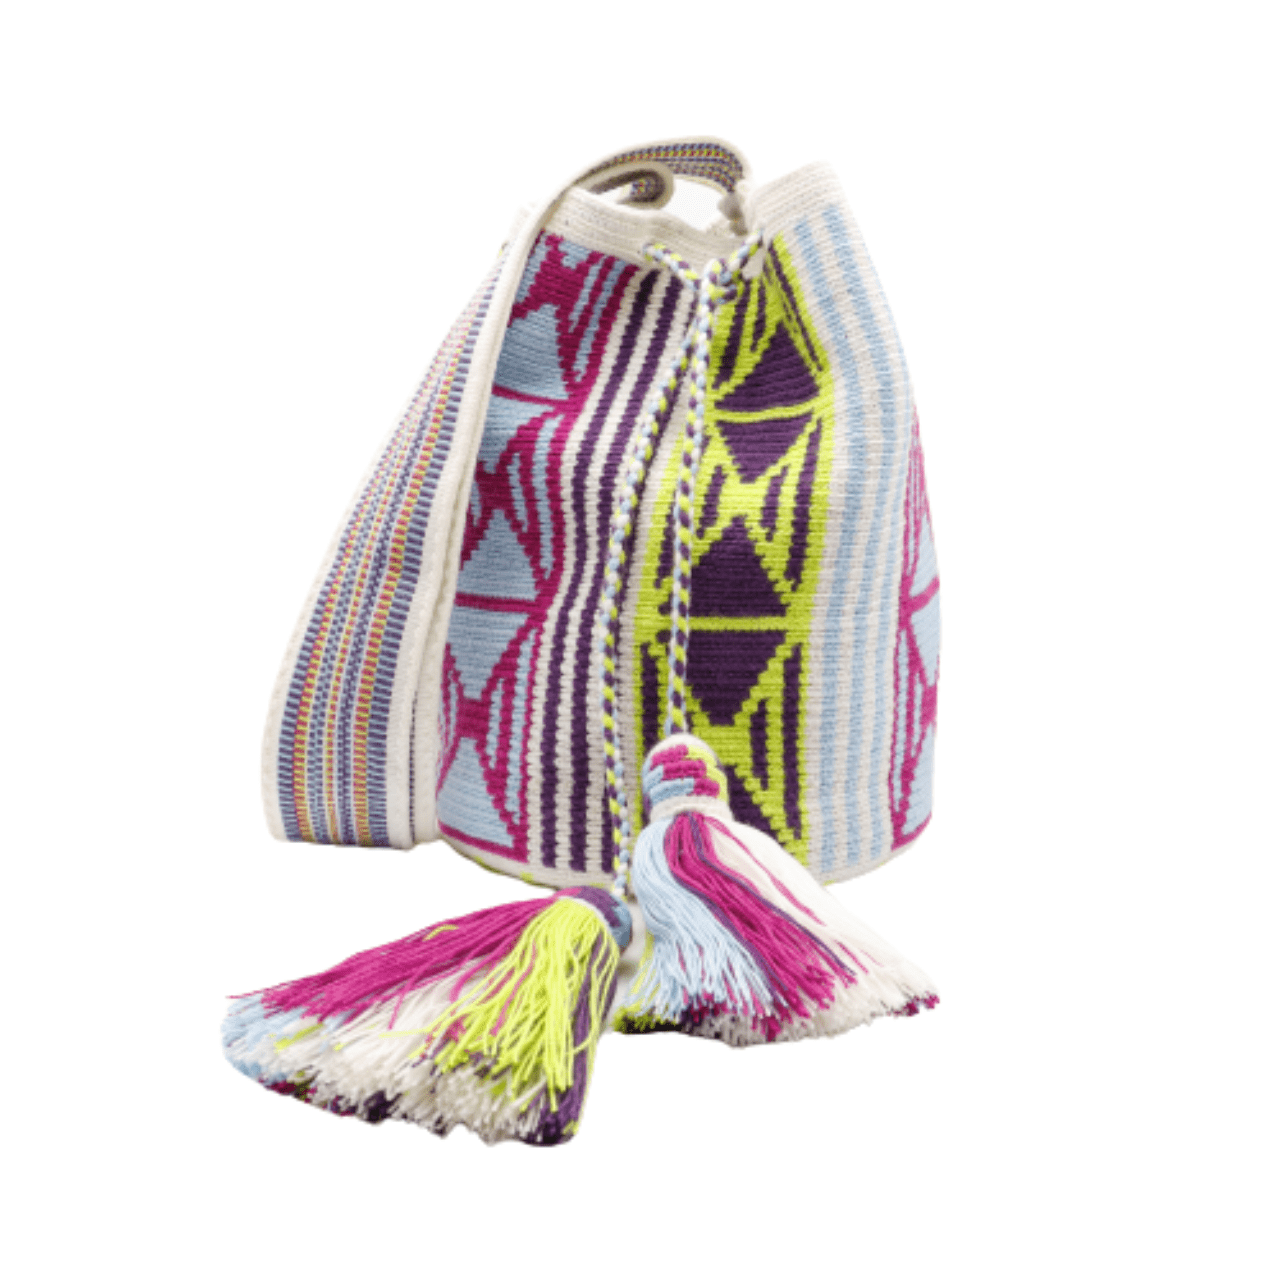 Emilia  Wayuu Mochila - Stunning Blend of Plum, Blue, Moss Green, and Sky Blue over a Beige Background - Discover Colombian Artistry